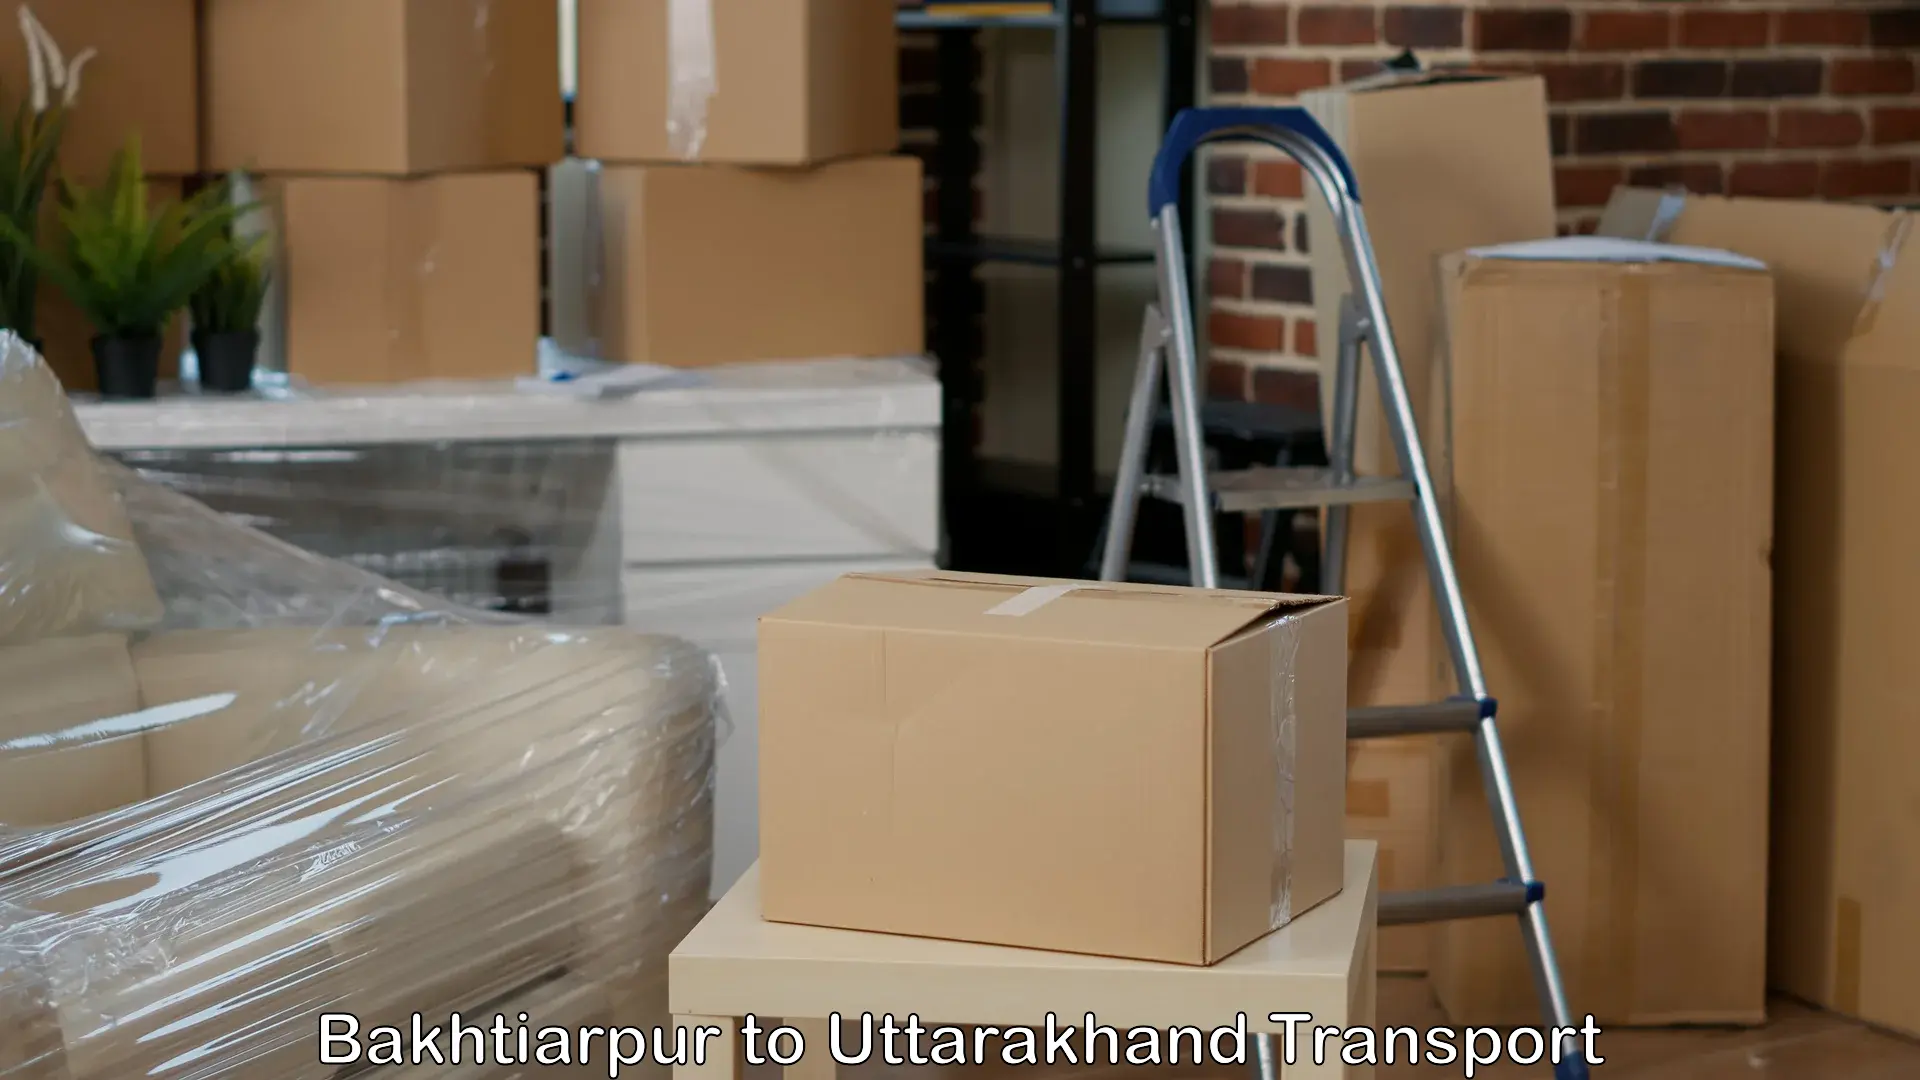 Container transportation services in Bakhtiarpur to Gopeshwar